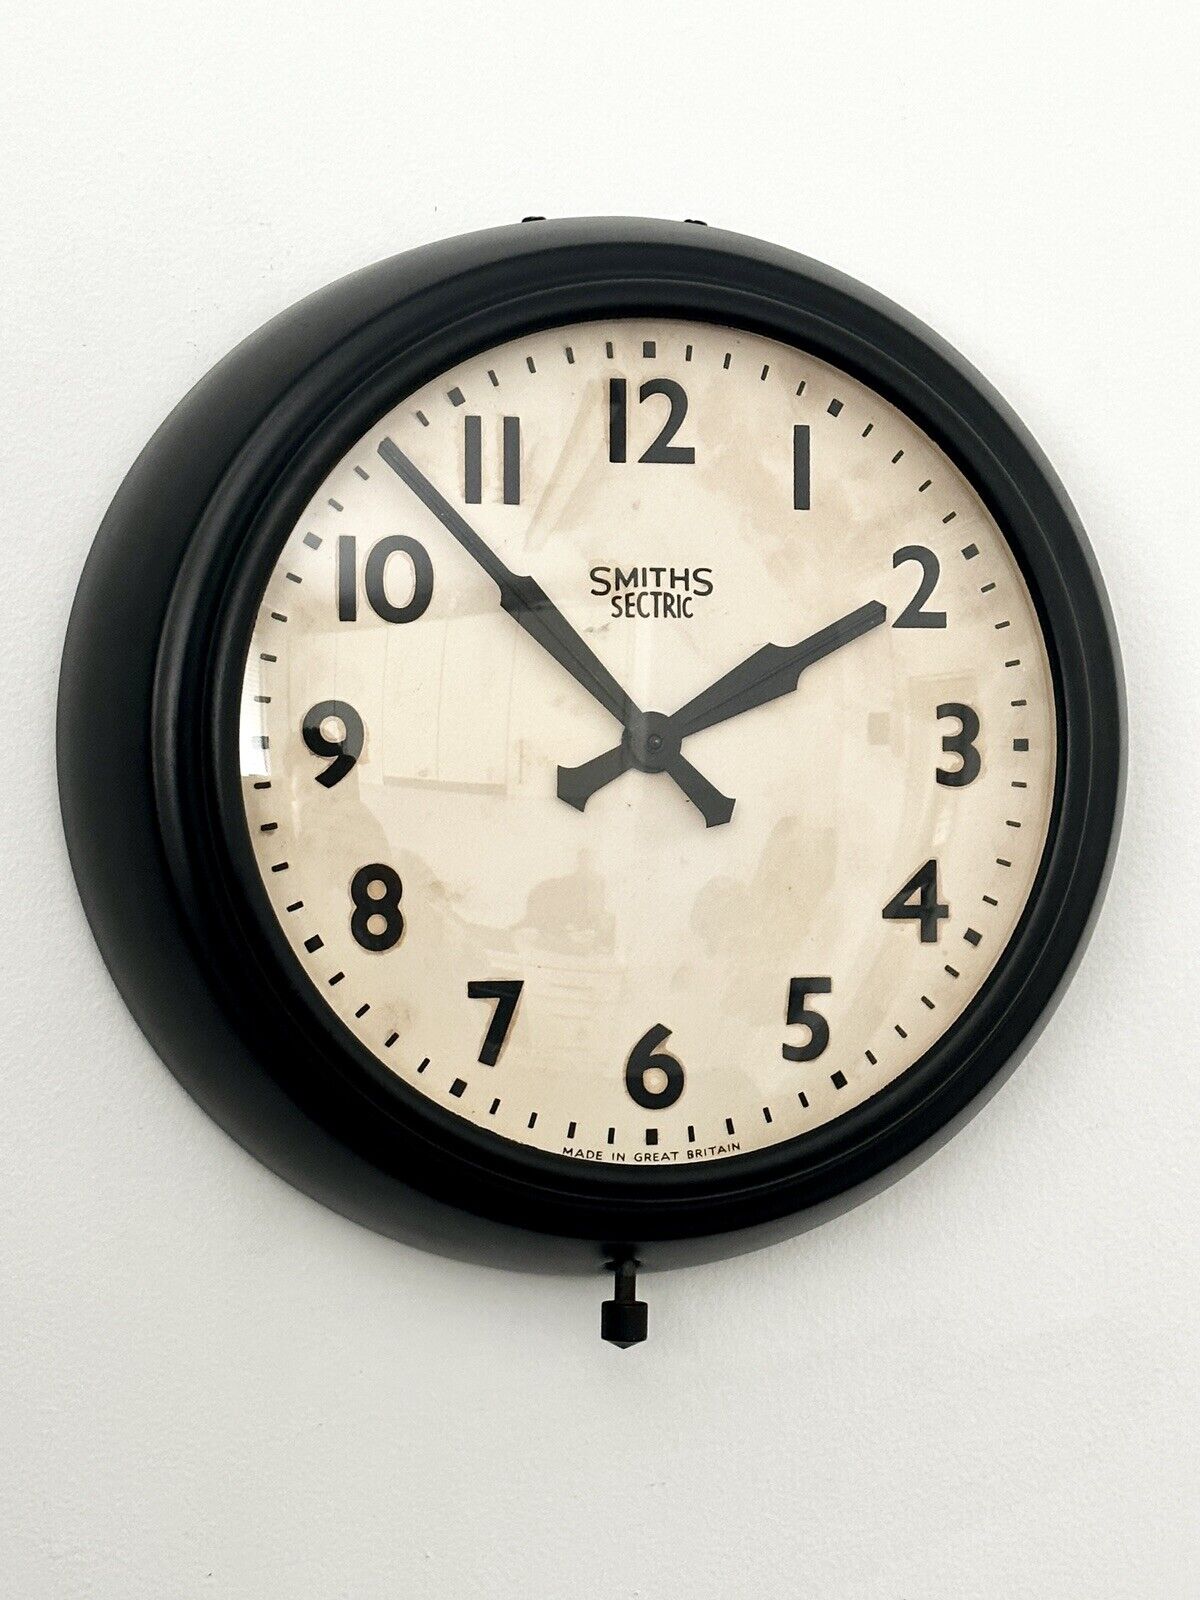 1950s Government Issued SMITHS SECTRIC Wall Clock.